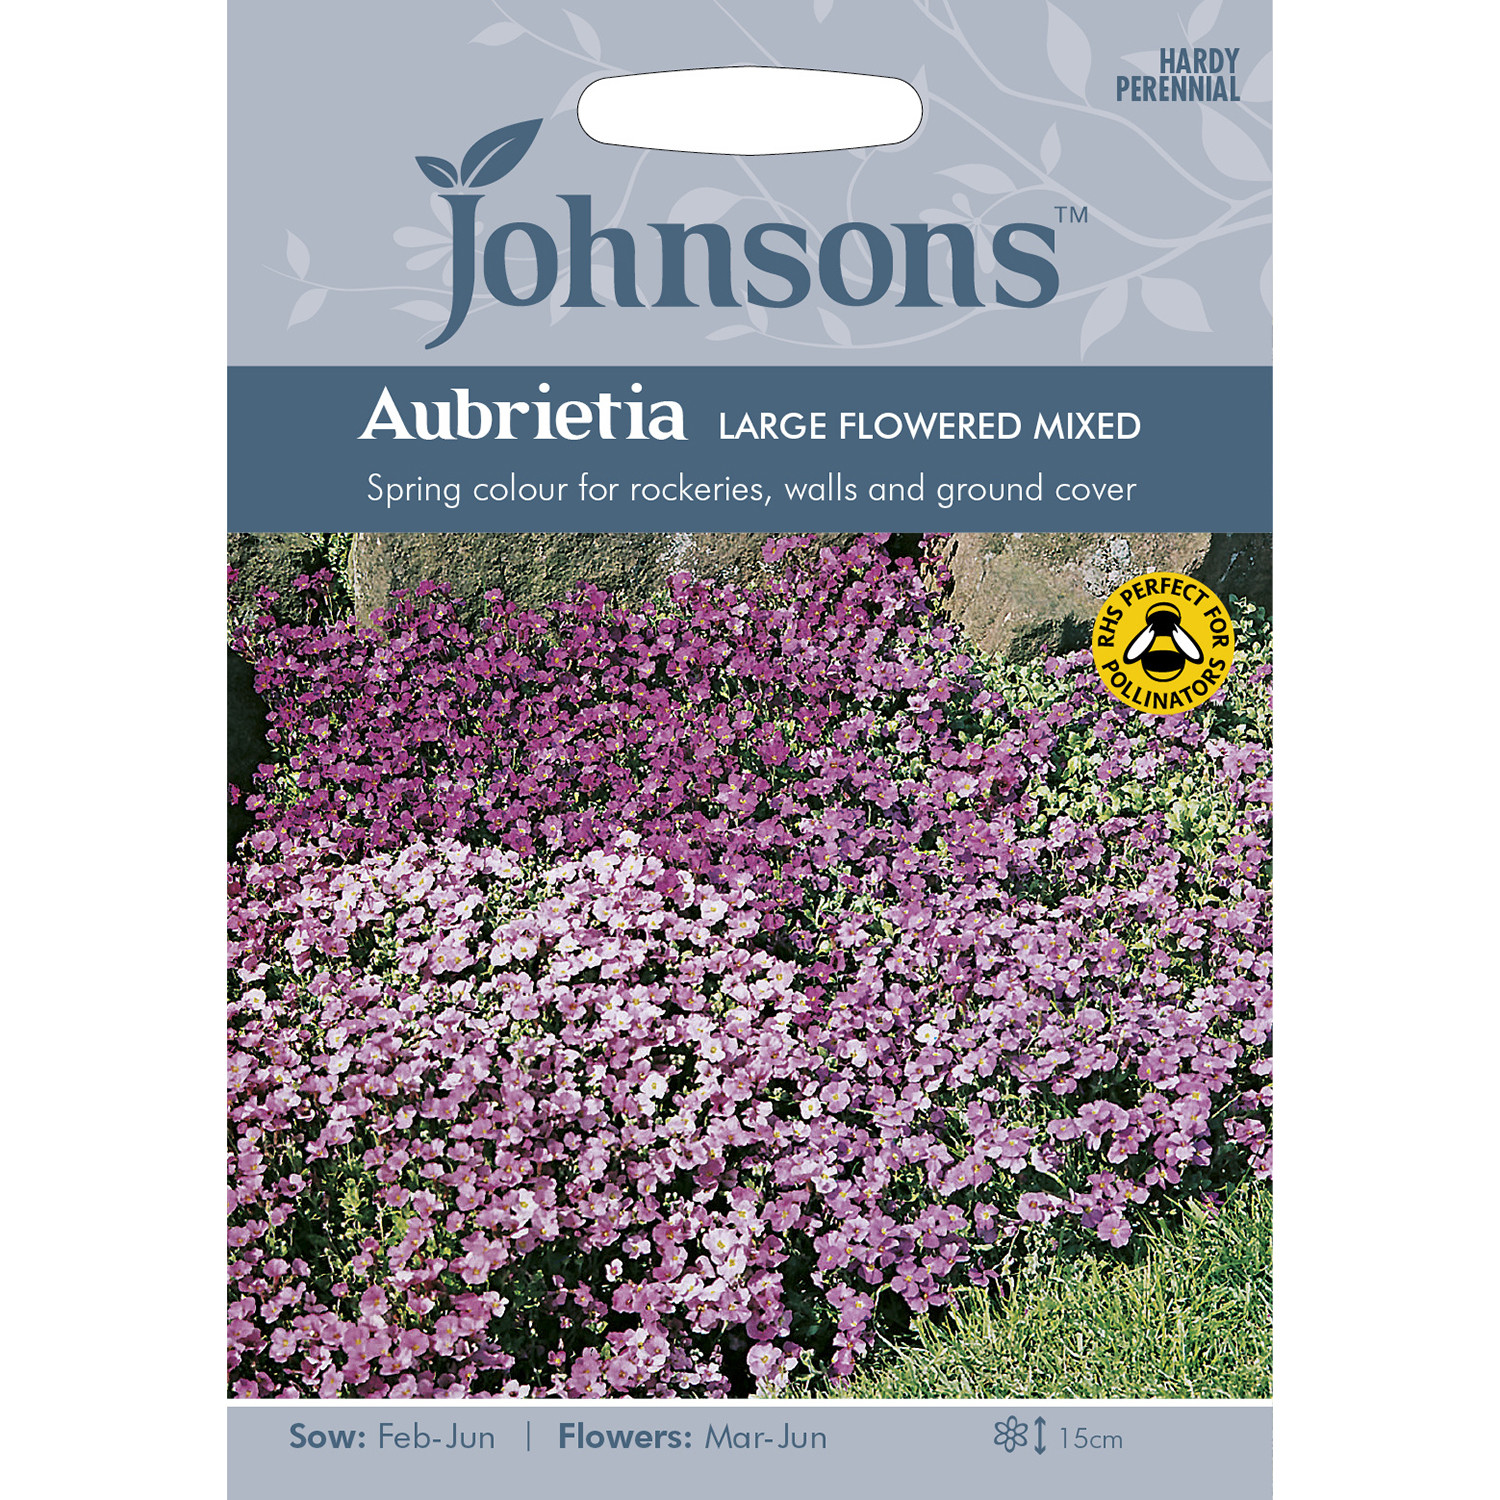 Johnsons Aubrietia Large Flowered Mixed Flower Seeds Image 2